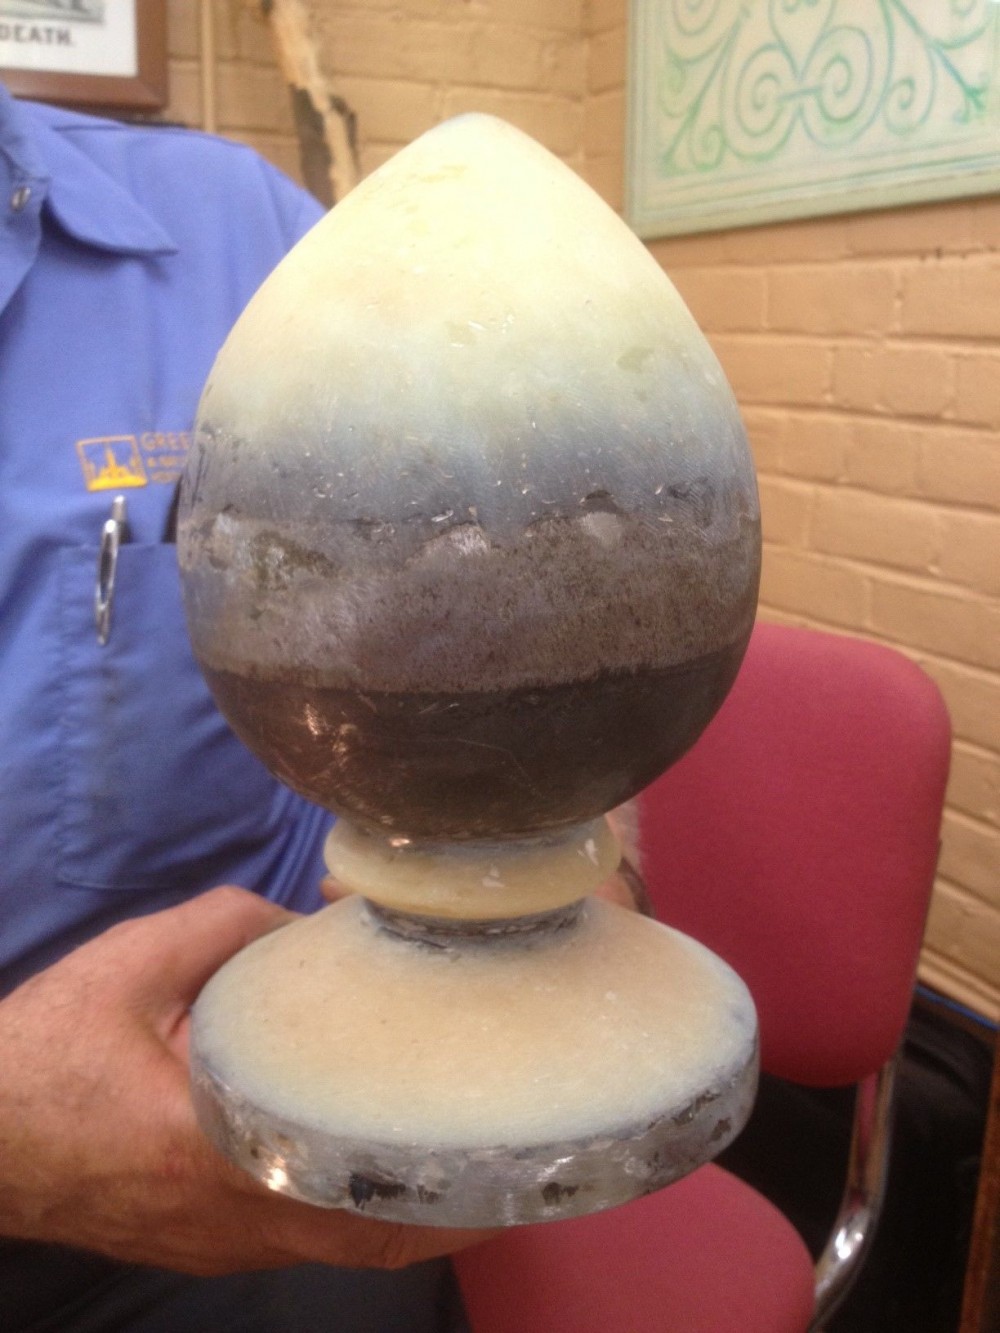 One of the replacement finials, before painting. Photograph by Art Presson.